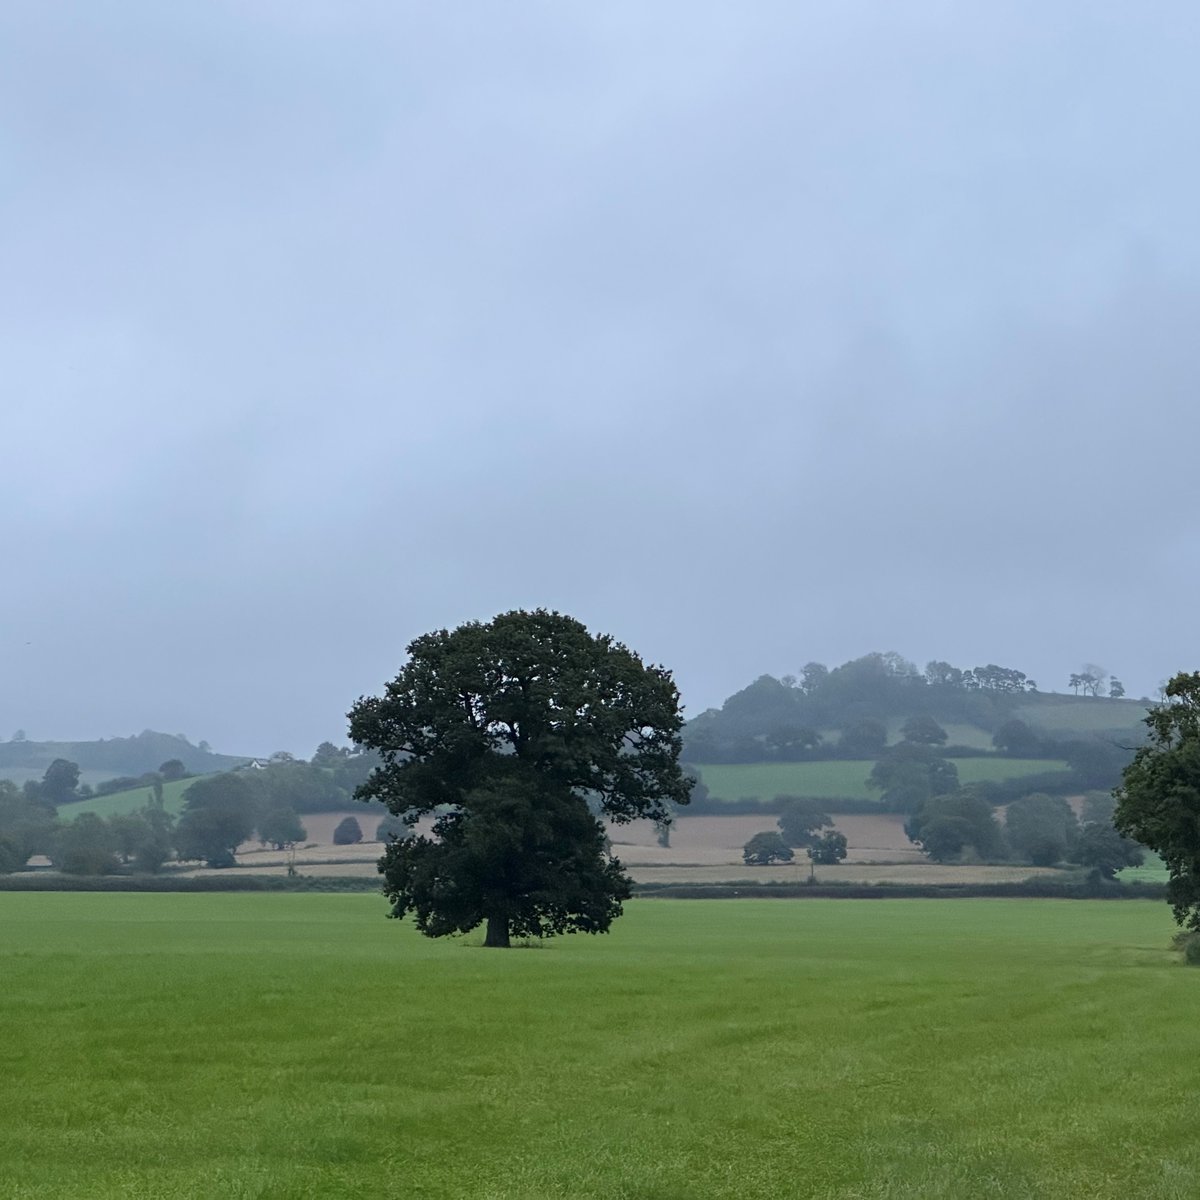 Trees symbolise the 'inter-connectedness' of everything & here in Somerset, folklore tells us that the oldest tree in the orchard will 'direct farmers to treasure'. We're yet to find treasure, but we connect with nature every day here at the farm. #sustainability